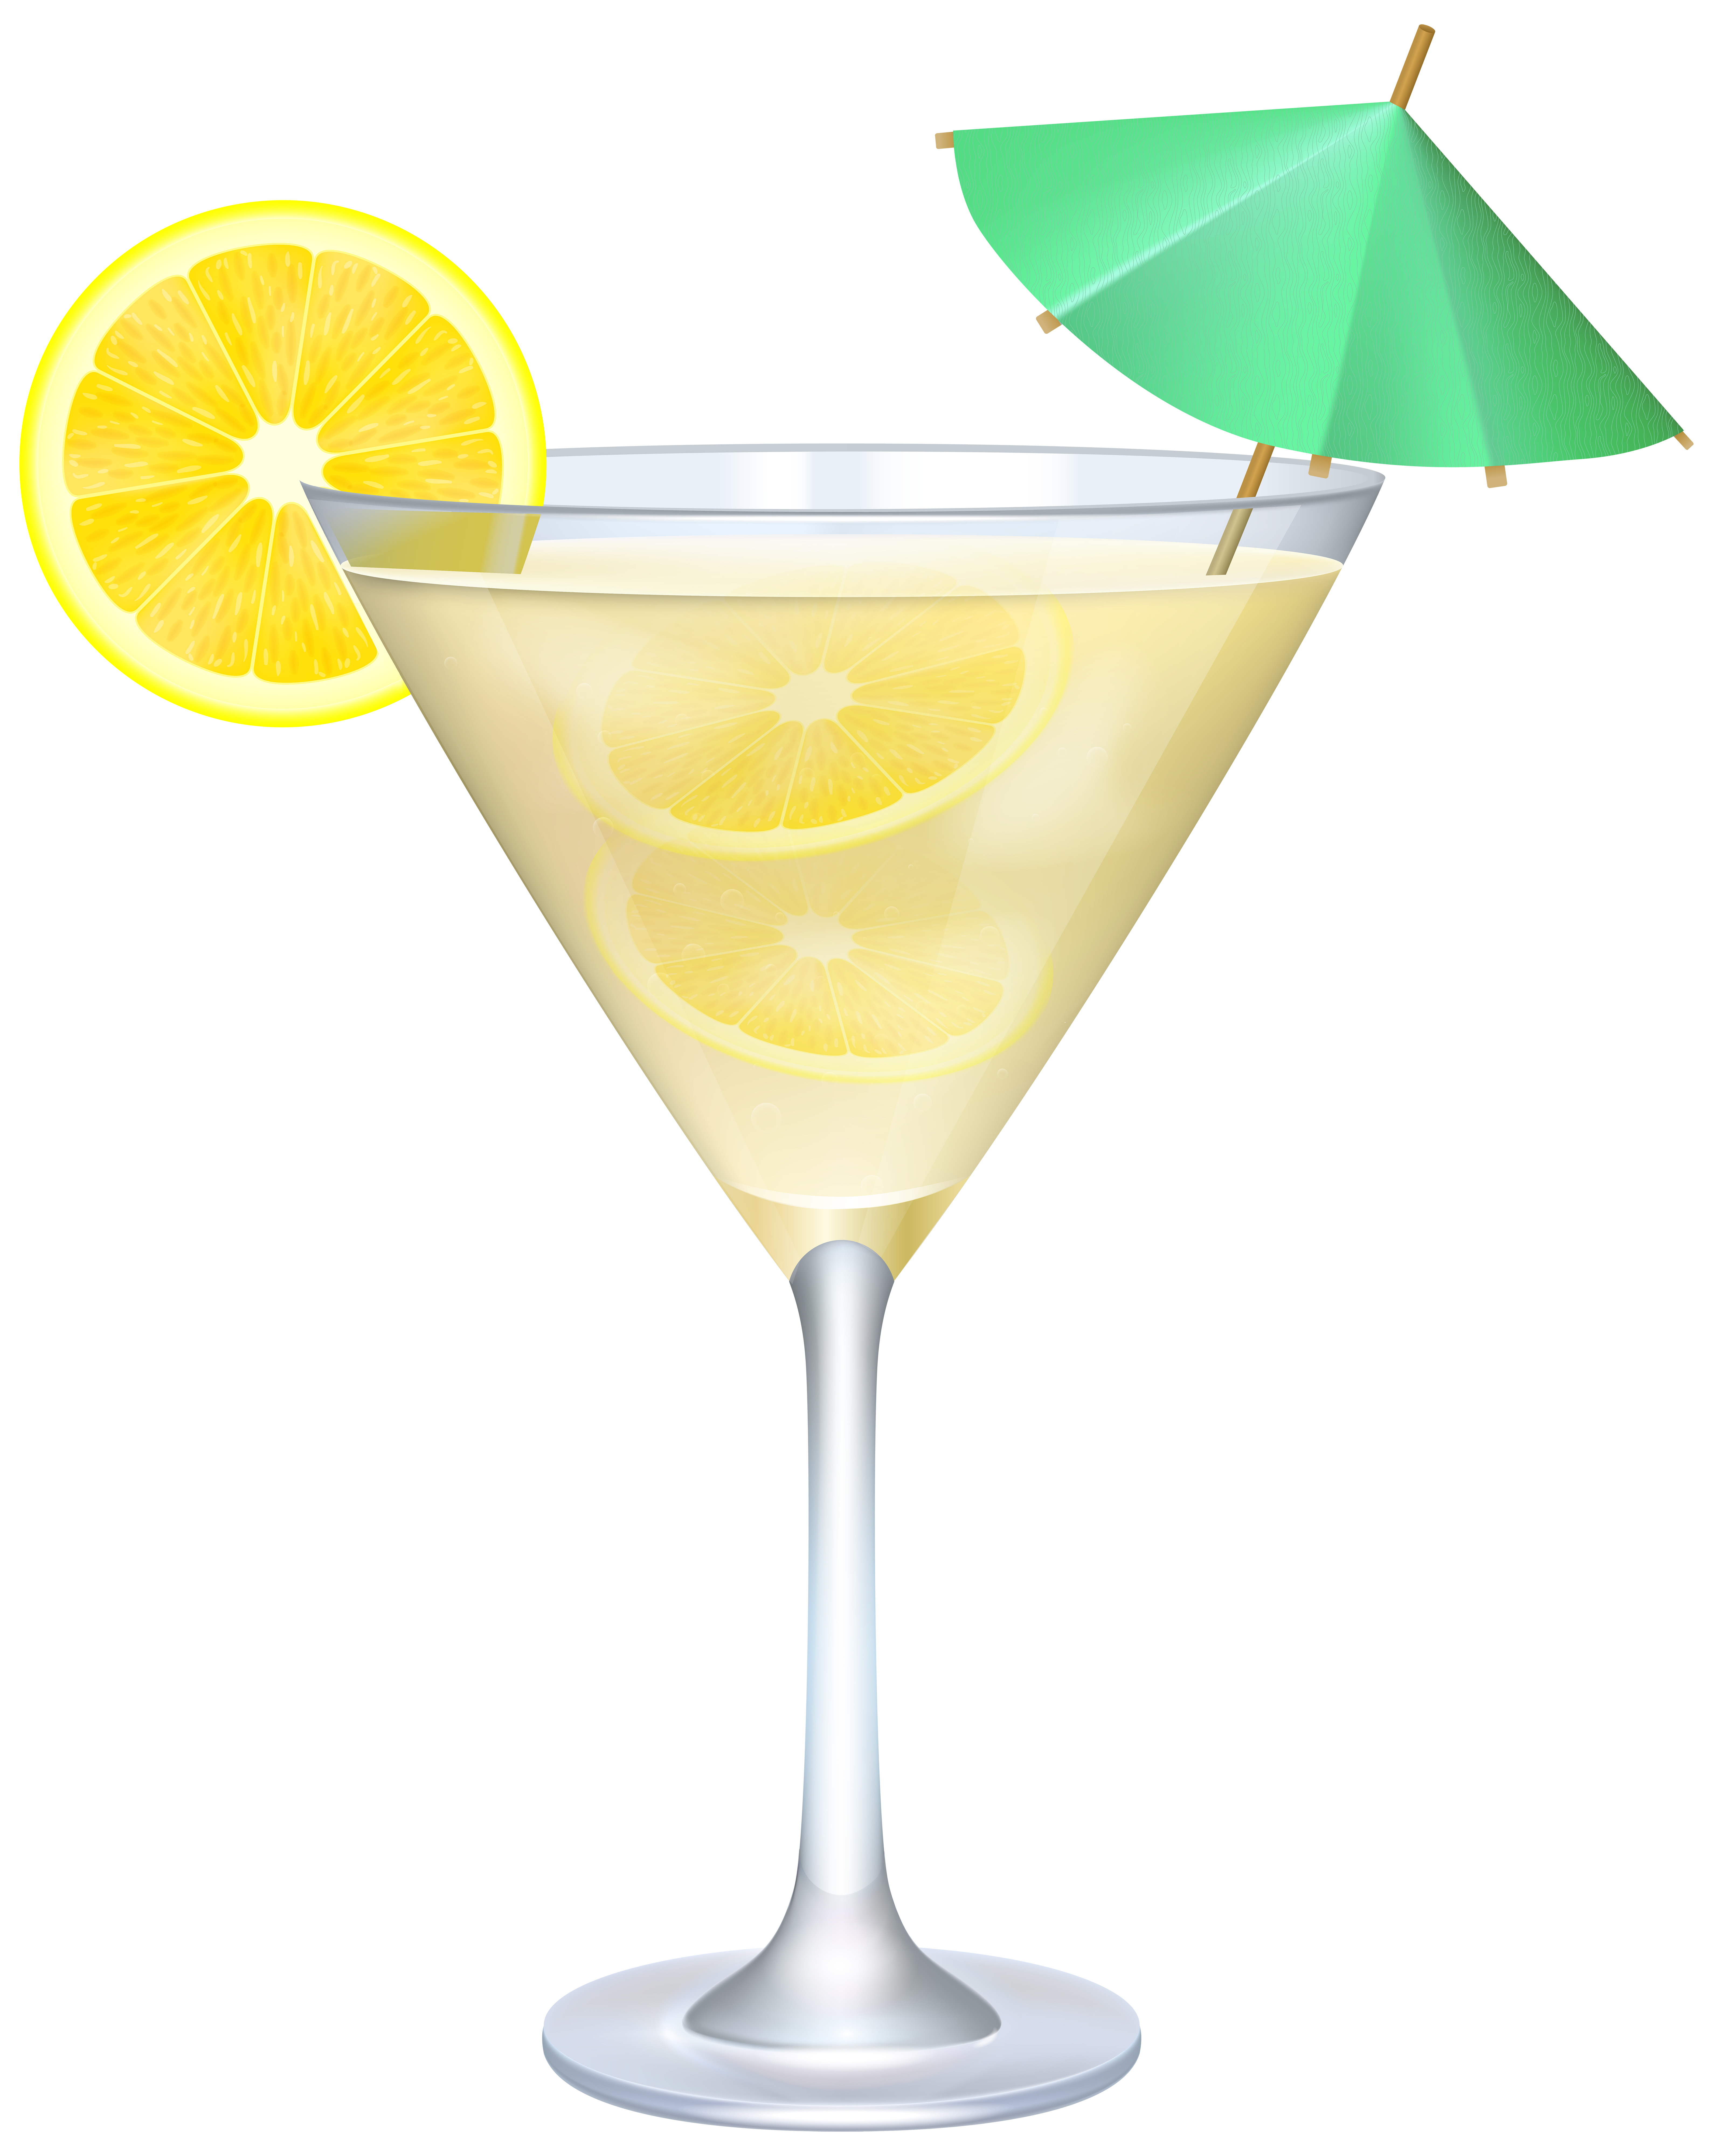 Cocktail with Lemon and Umbrella PNG Clip Art Image | Gallery ...